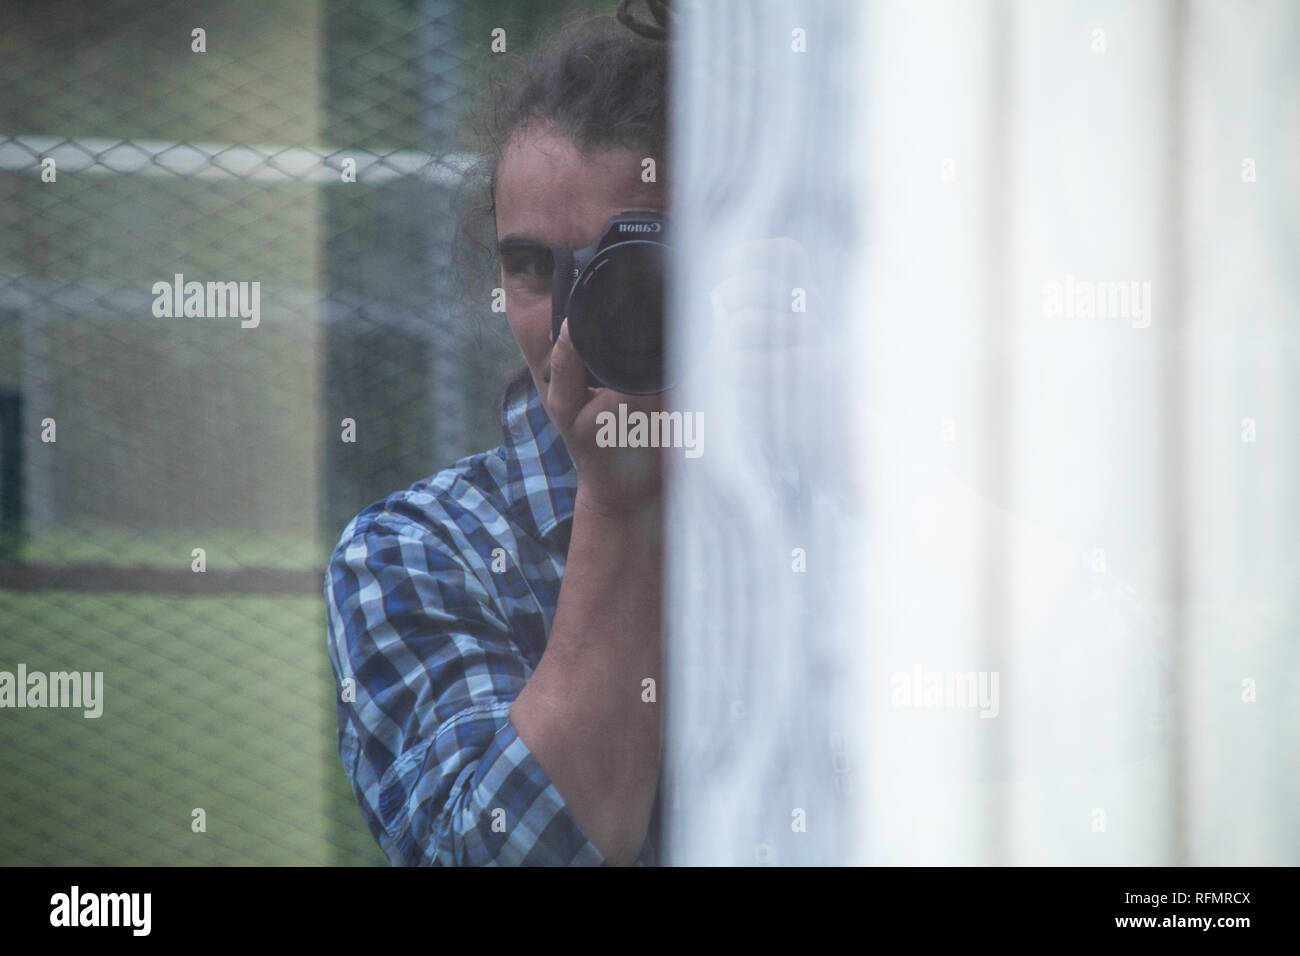 A self portrait (reflection on a window) of a male photographer with dreadlocks using an old Canon EOS 500d camera Stock Photo